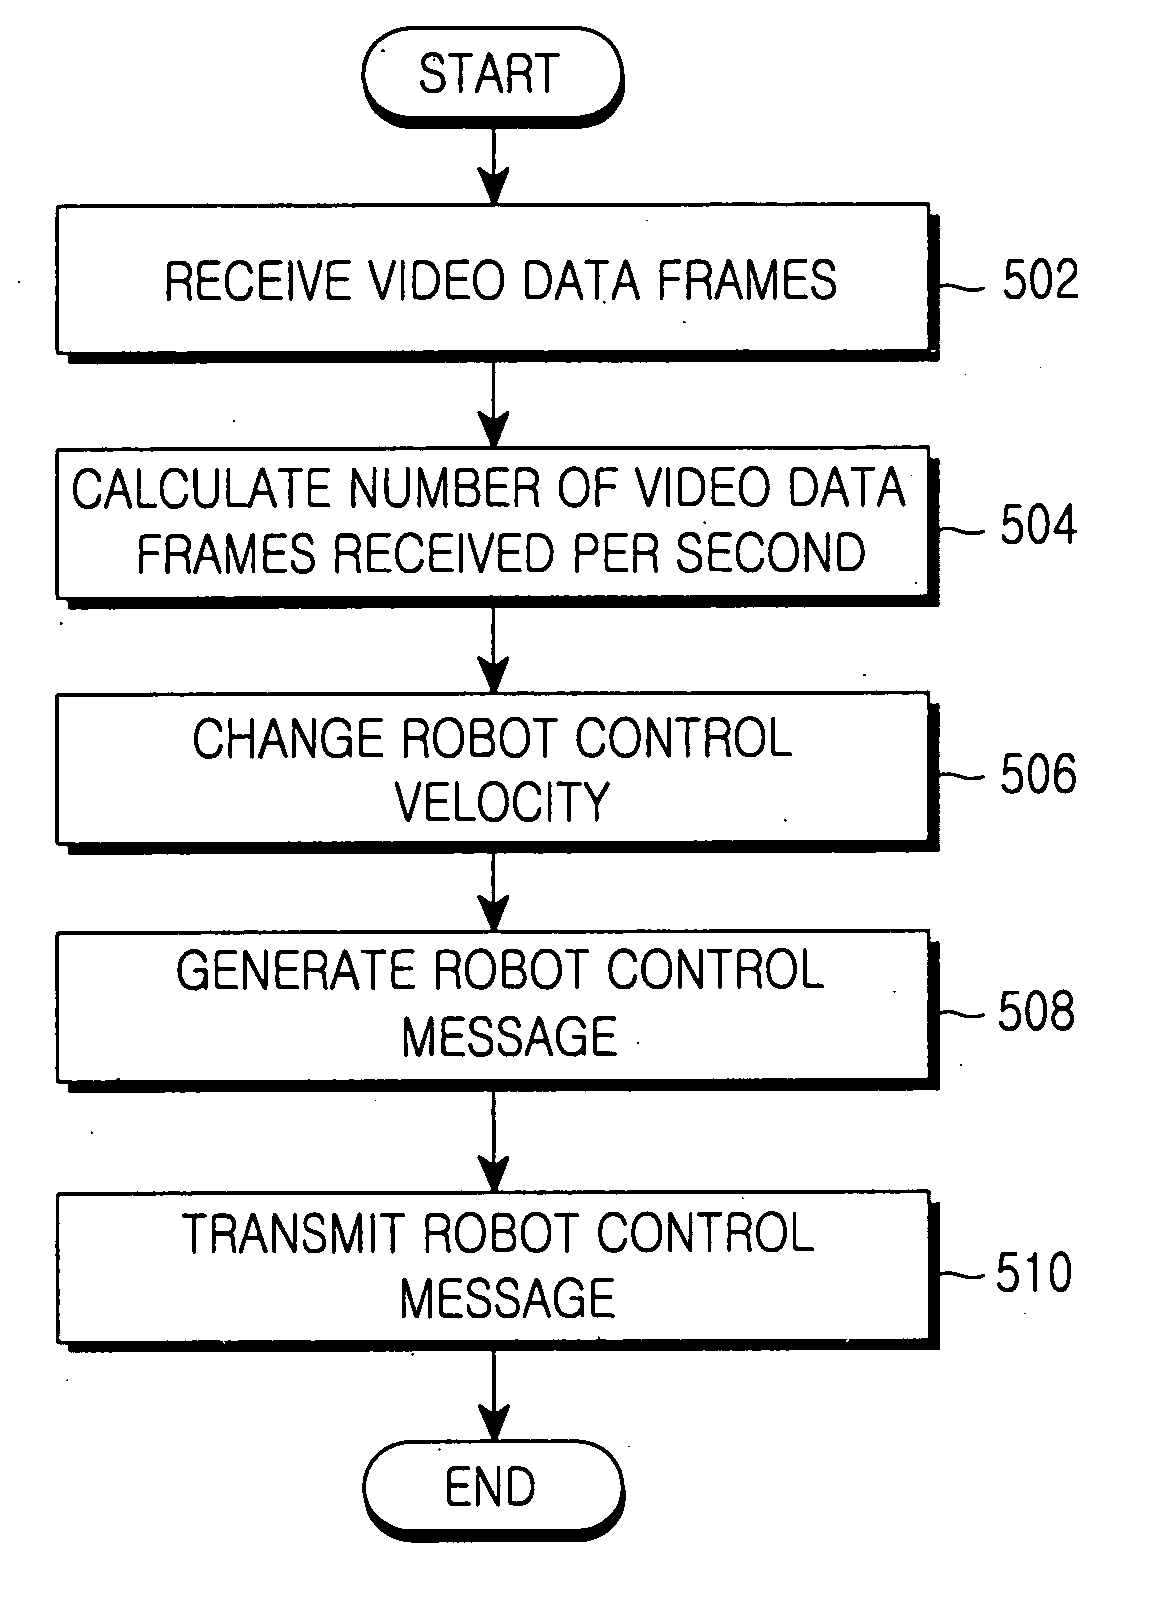 Network-based robot control system and robot velocity control method in the network-based robot control system